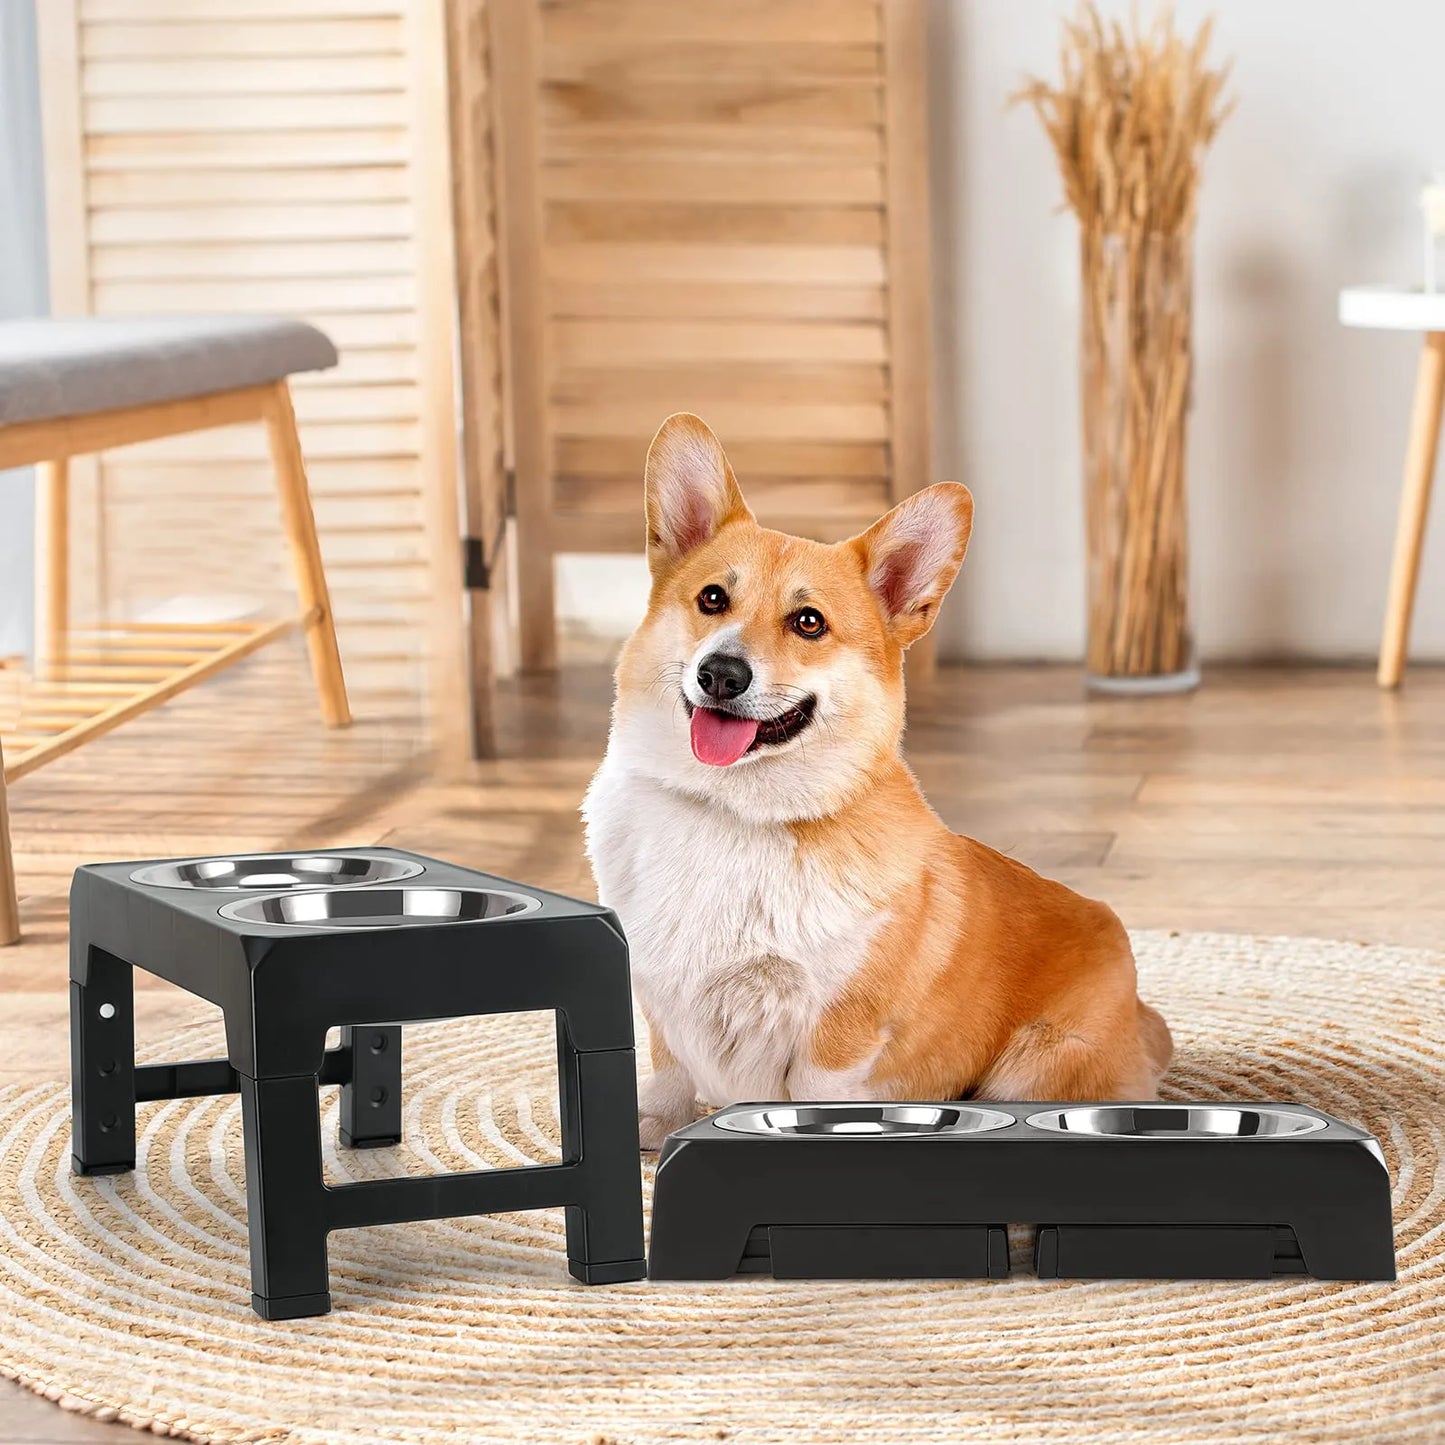 Elevated Dog Feeder Dogs Bowls Adjustable Raised Stand with Double